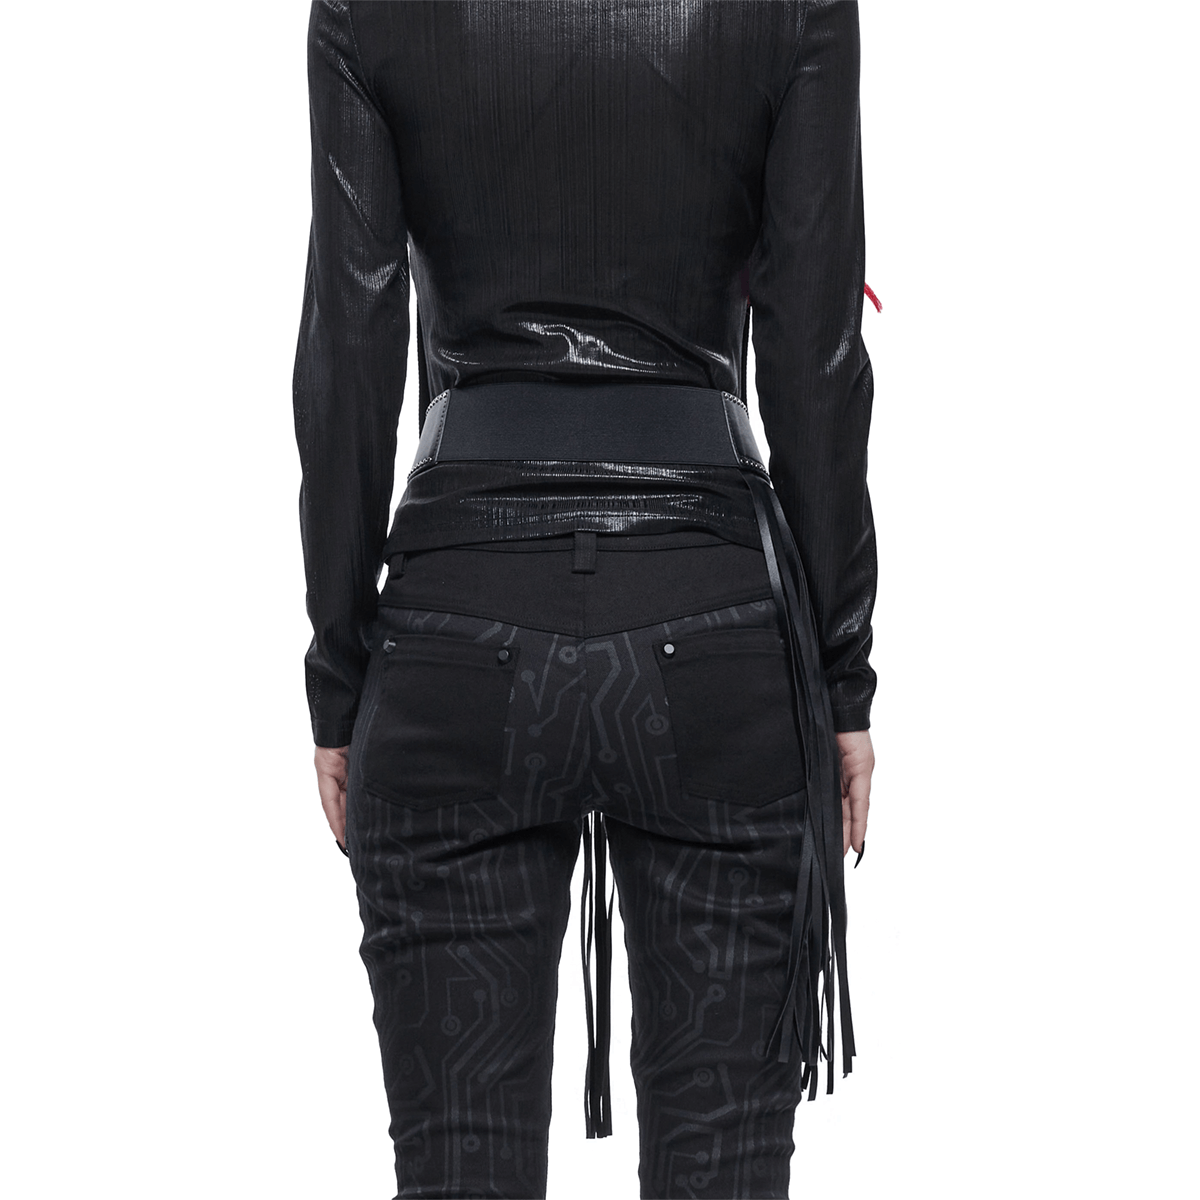 Gothic Faux Leather Belt with Buckle Front & Elastic Back / Women's Black Belt wuth Long Tassels - HARD'N'HEAVY